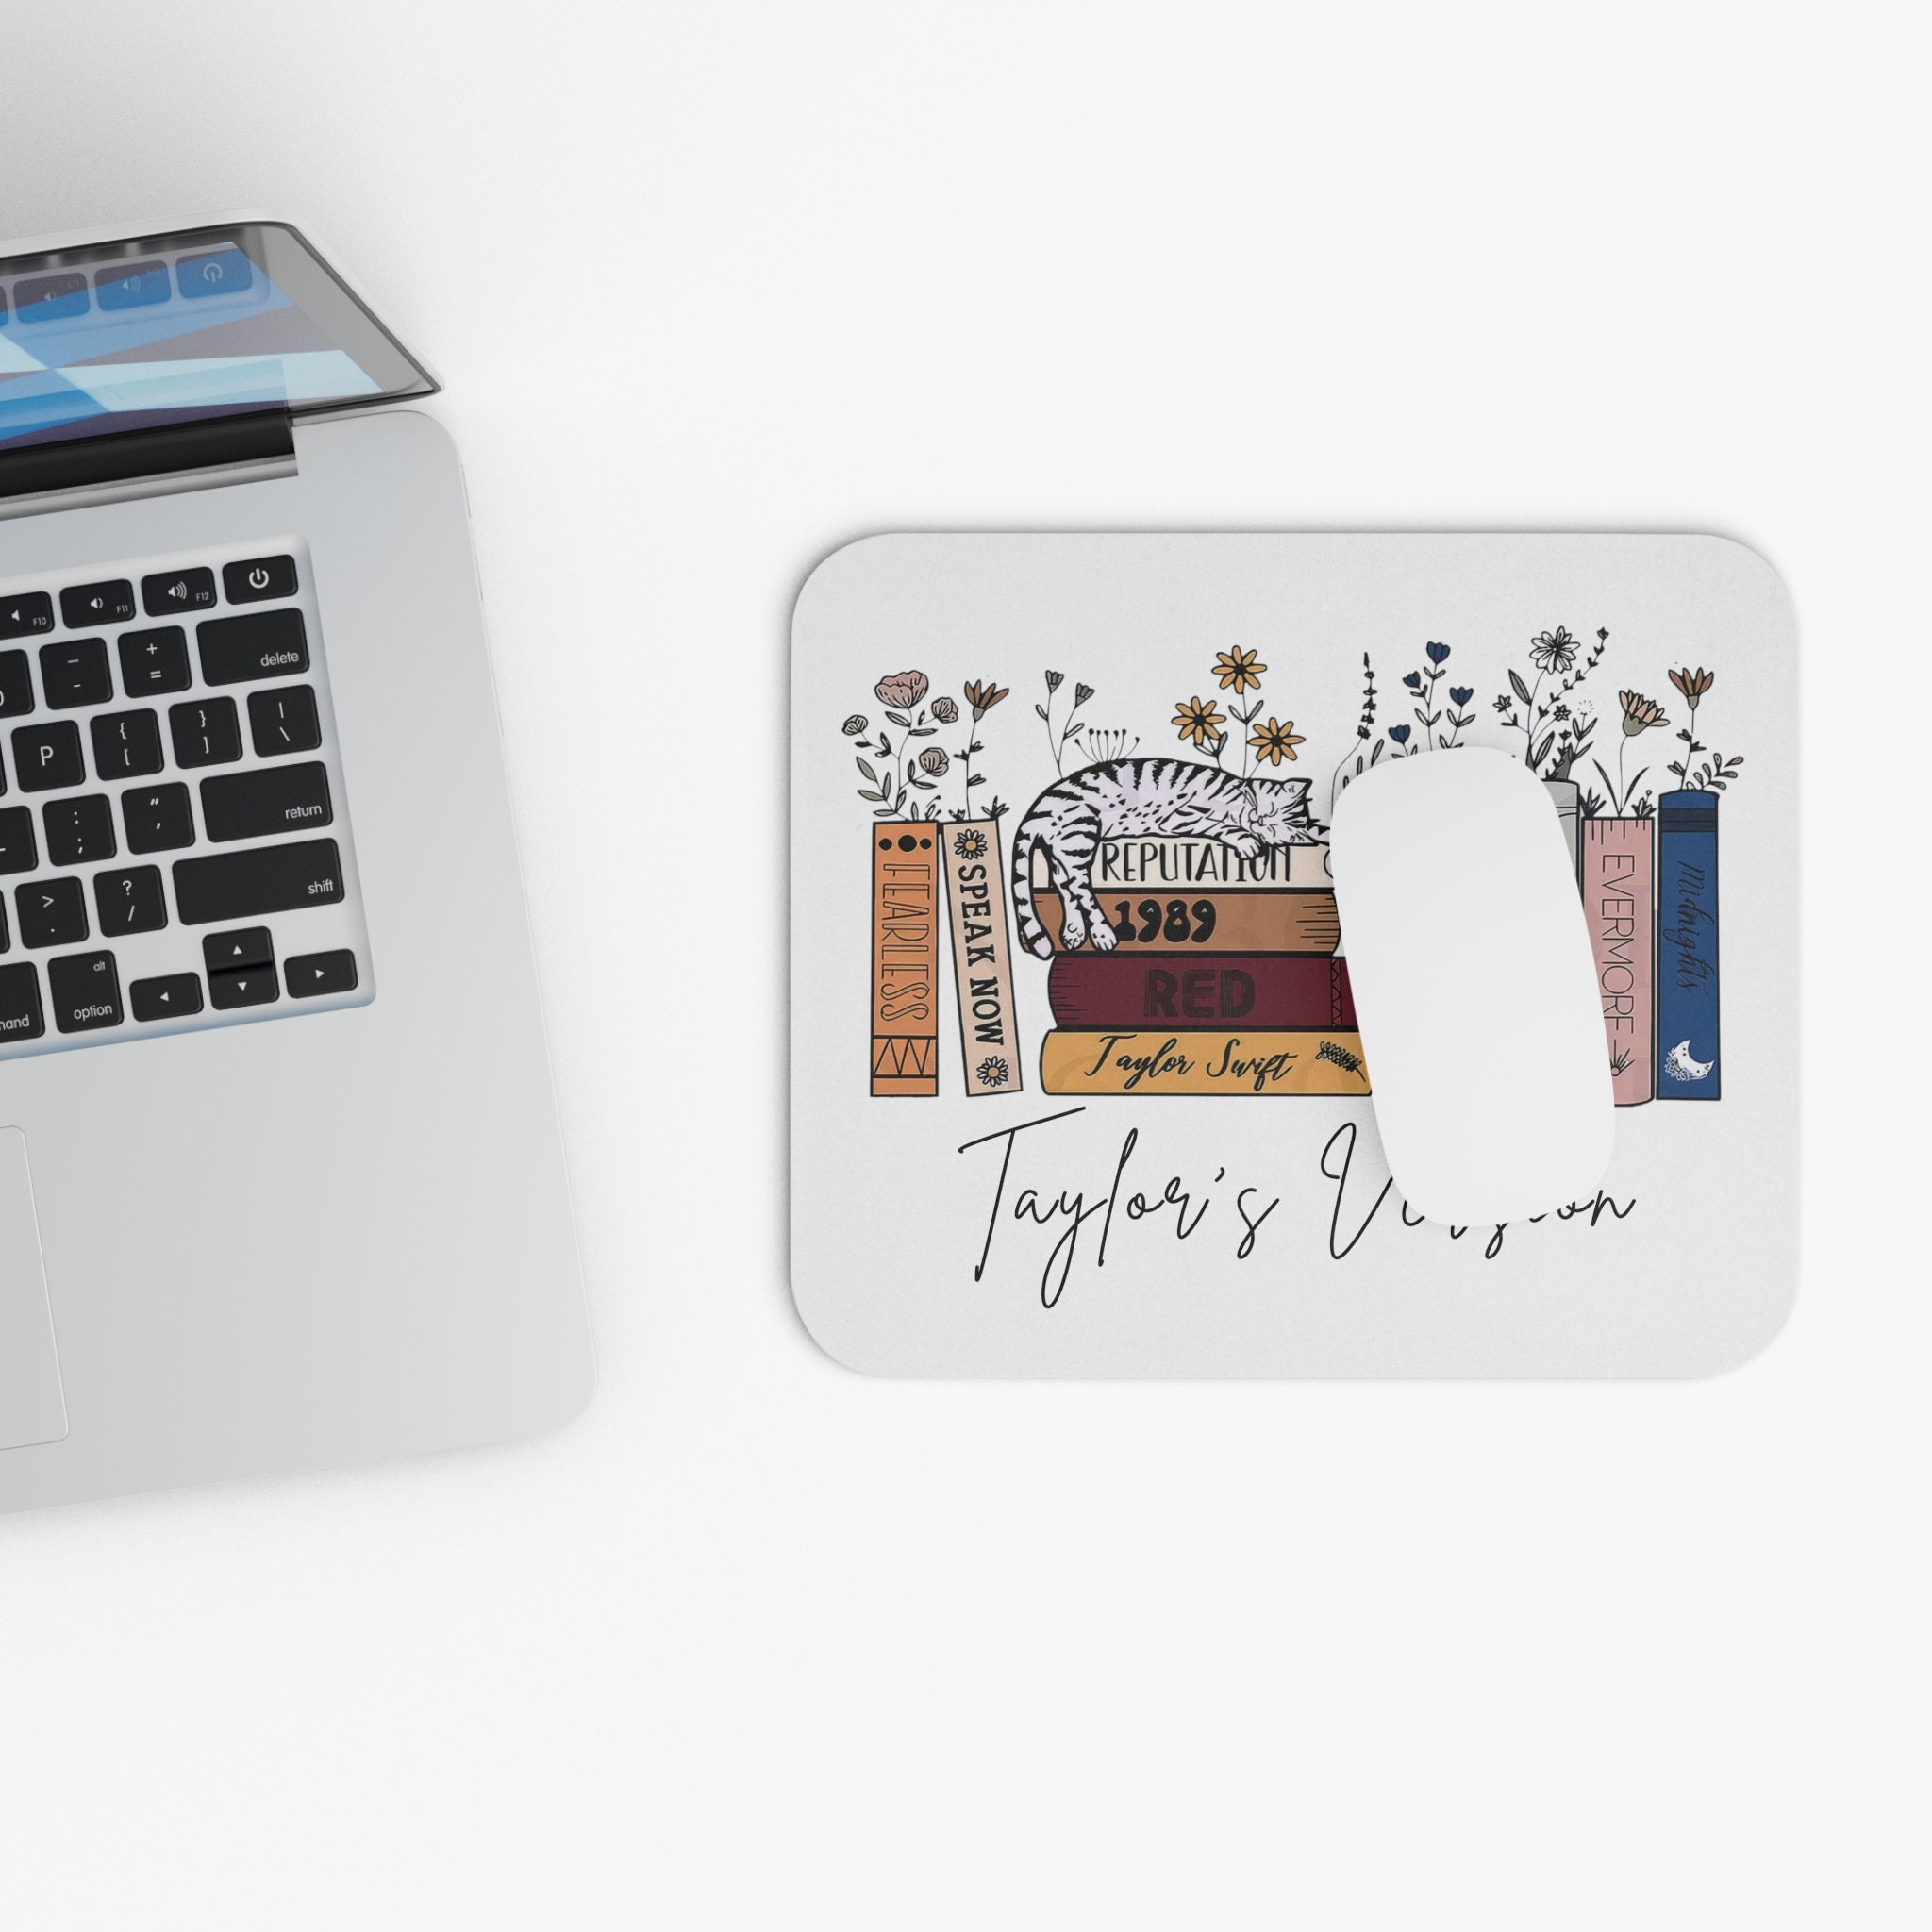 Taylor Mouse Pad T Swift Mouse Pad